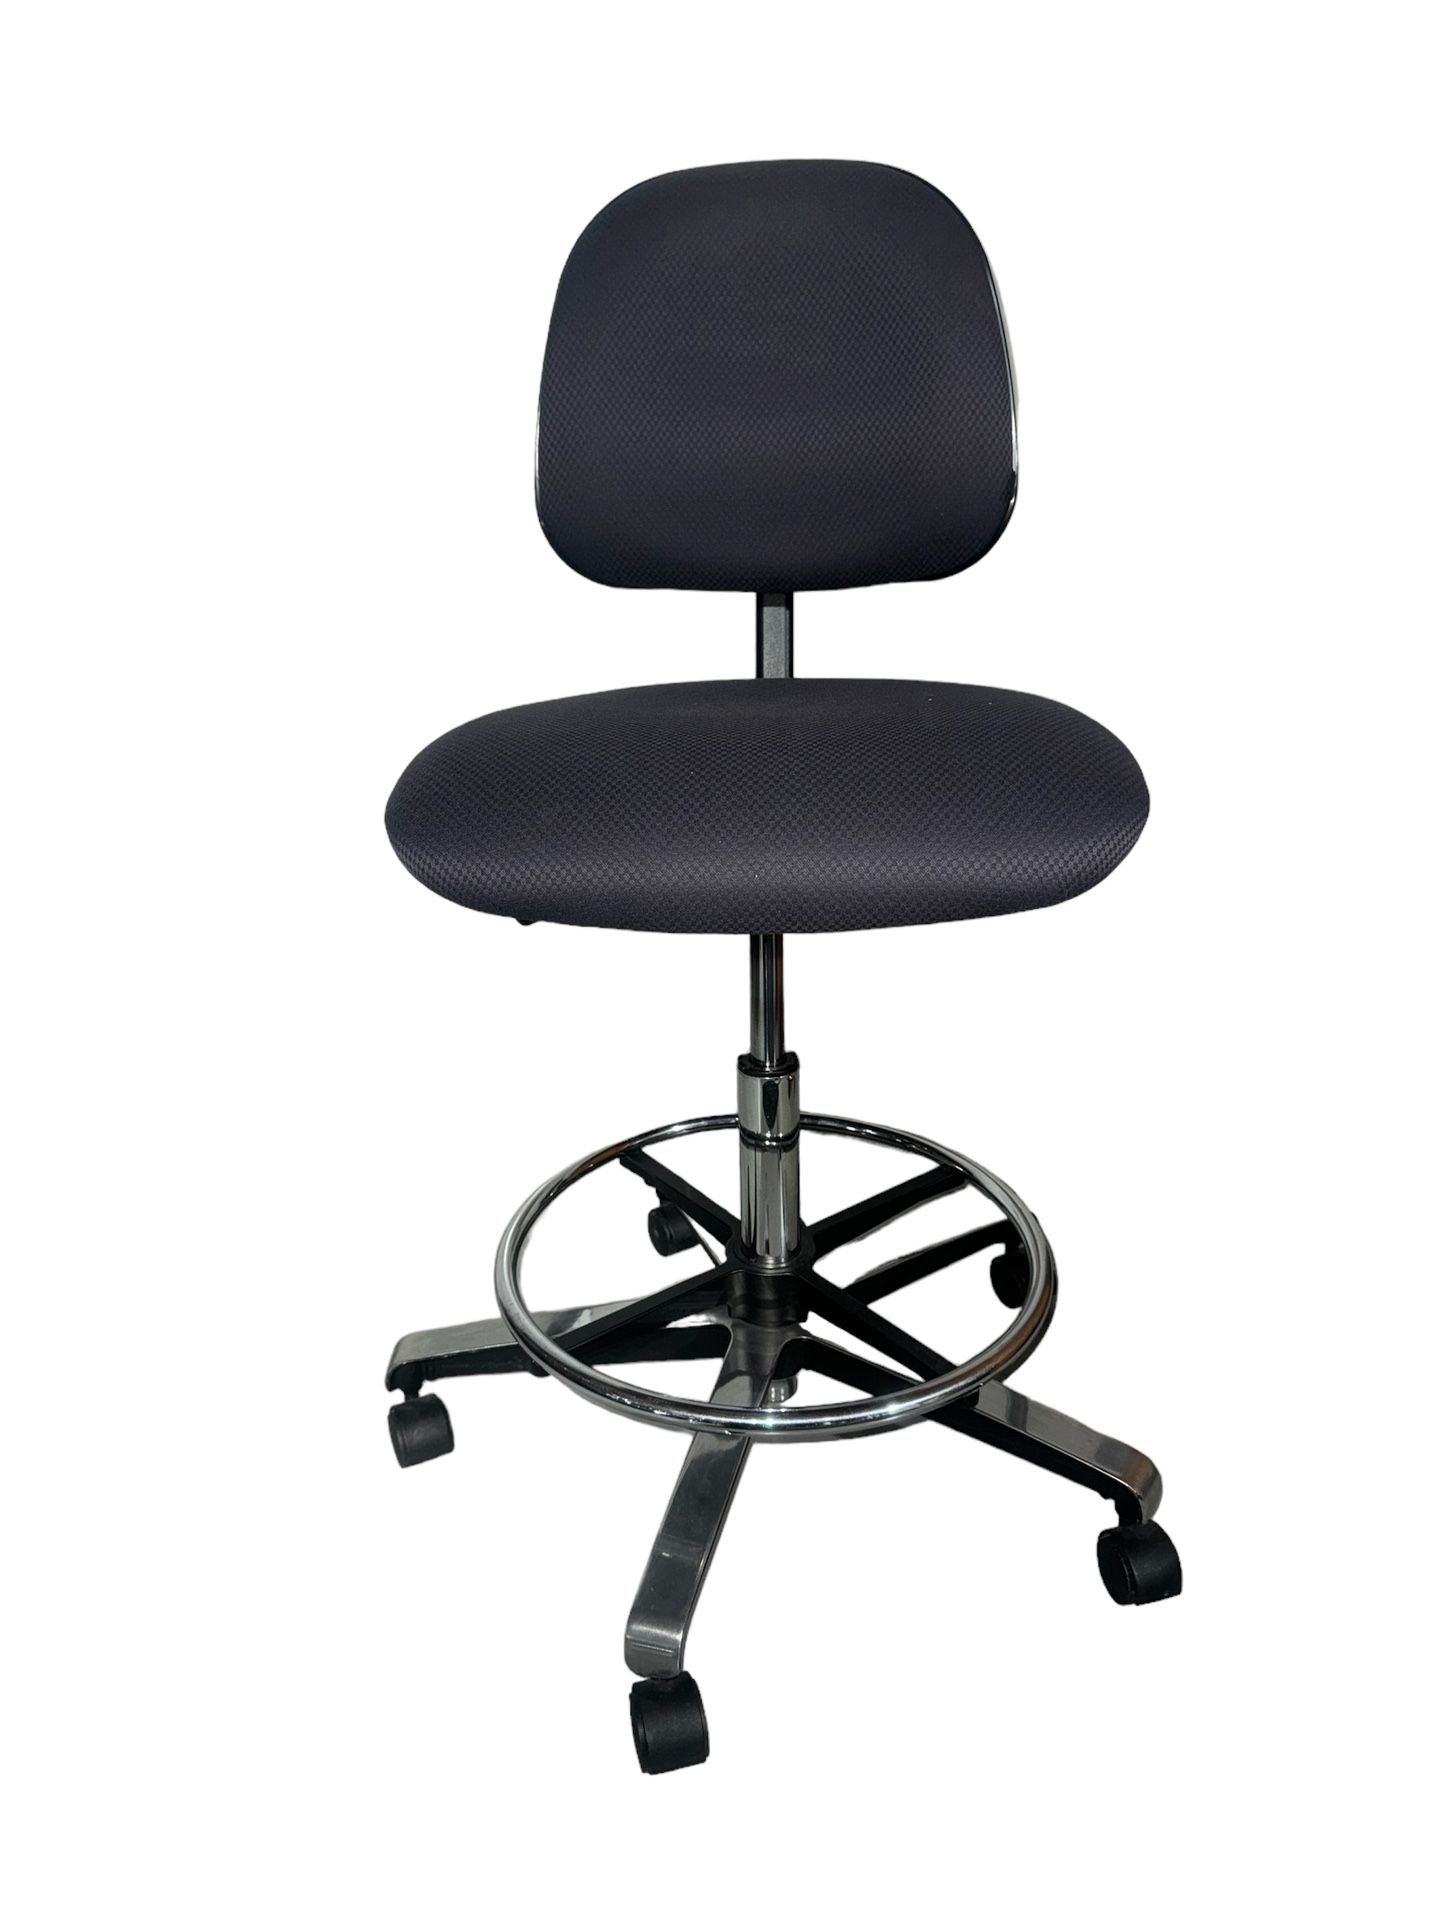 Armless Drafting Stool Counter Height Chair with Double Wheel Casters Black